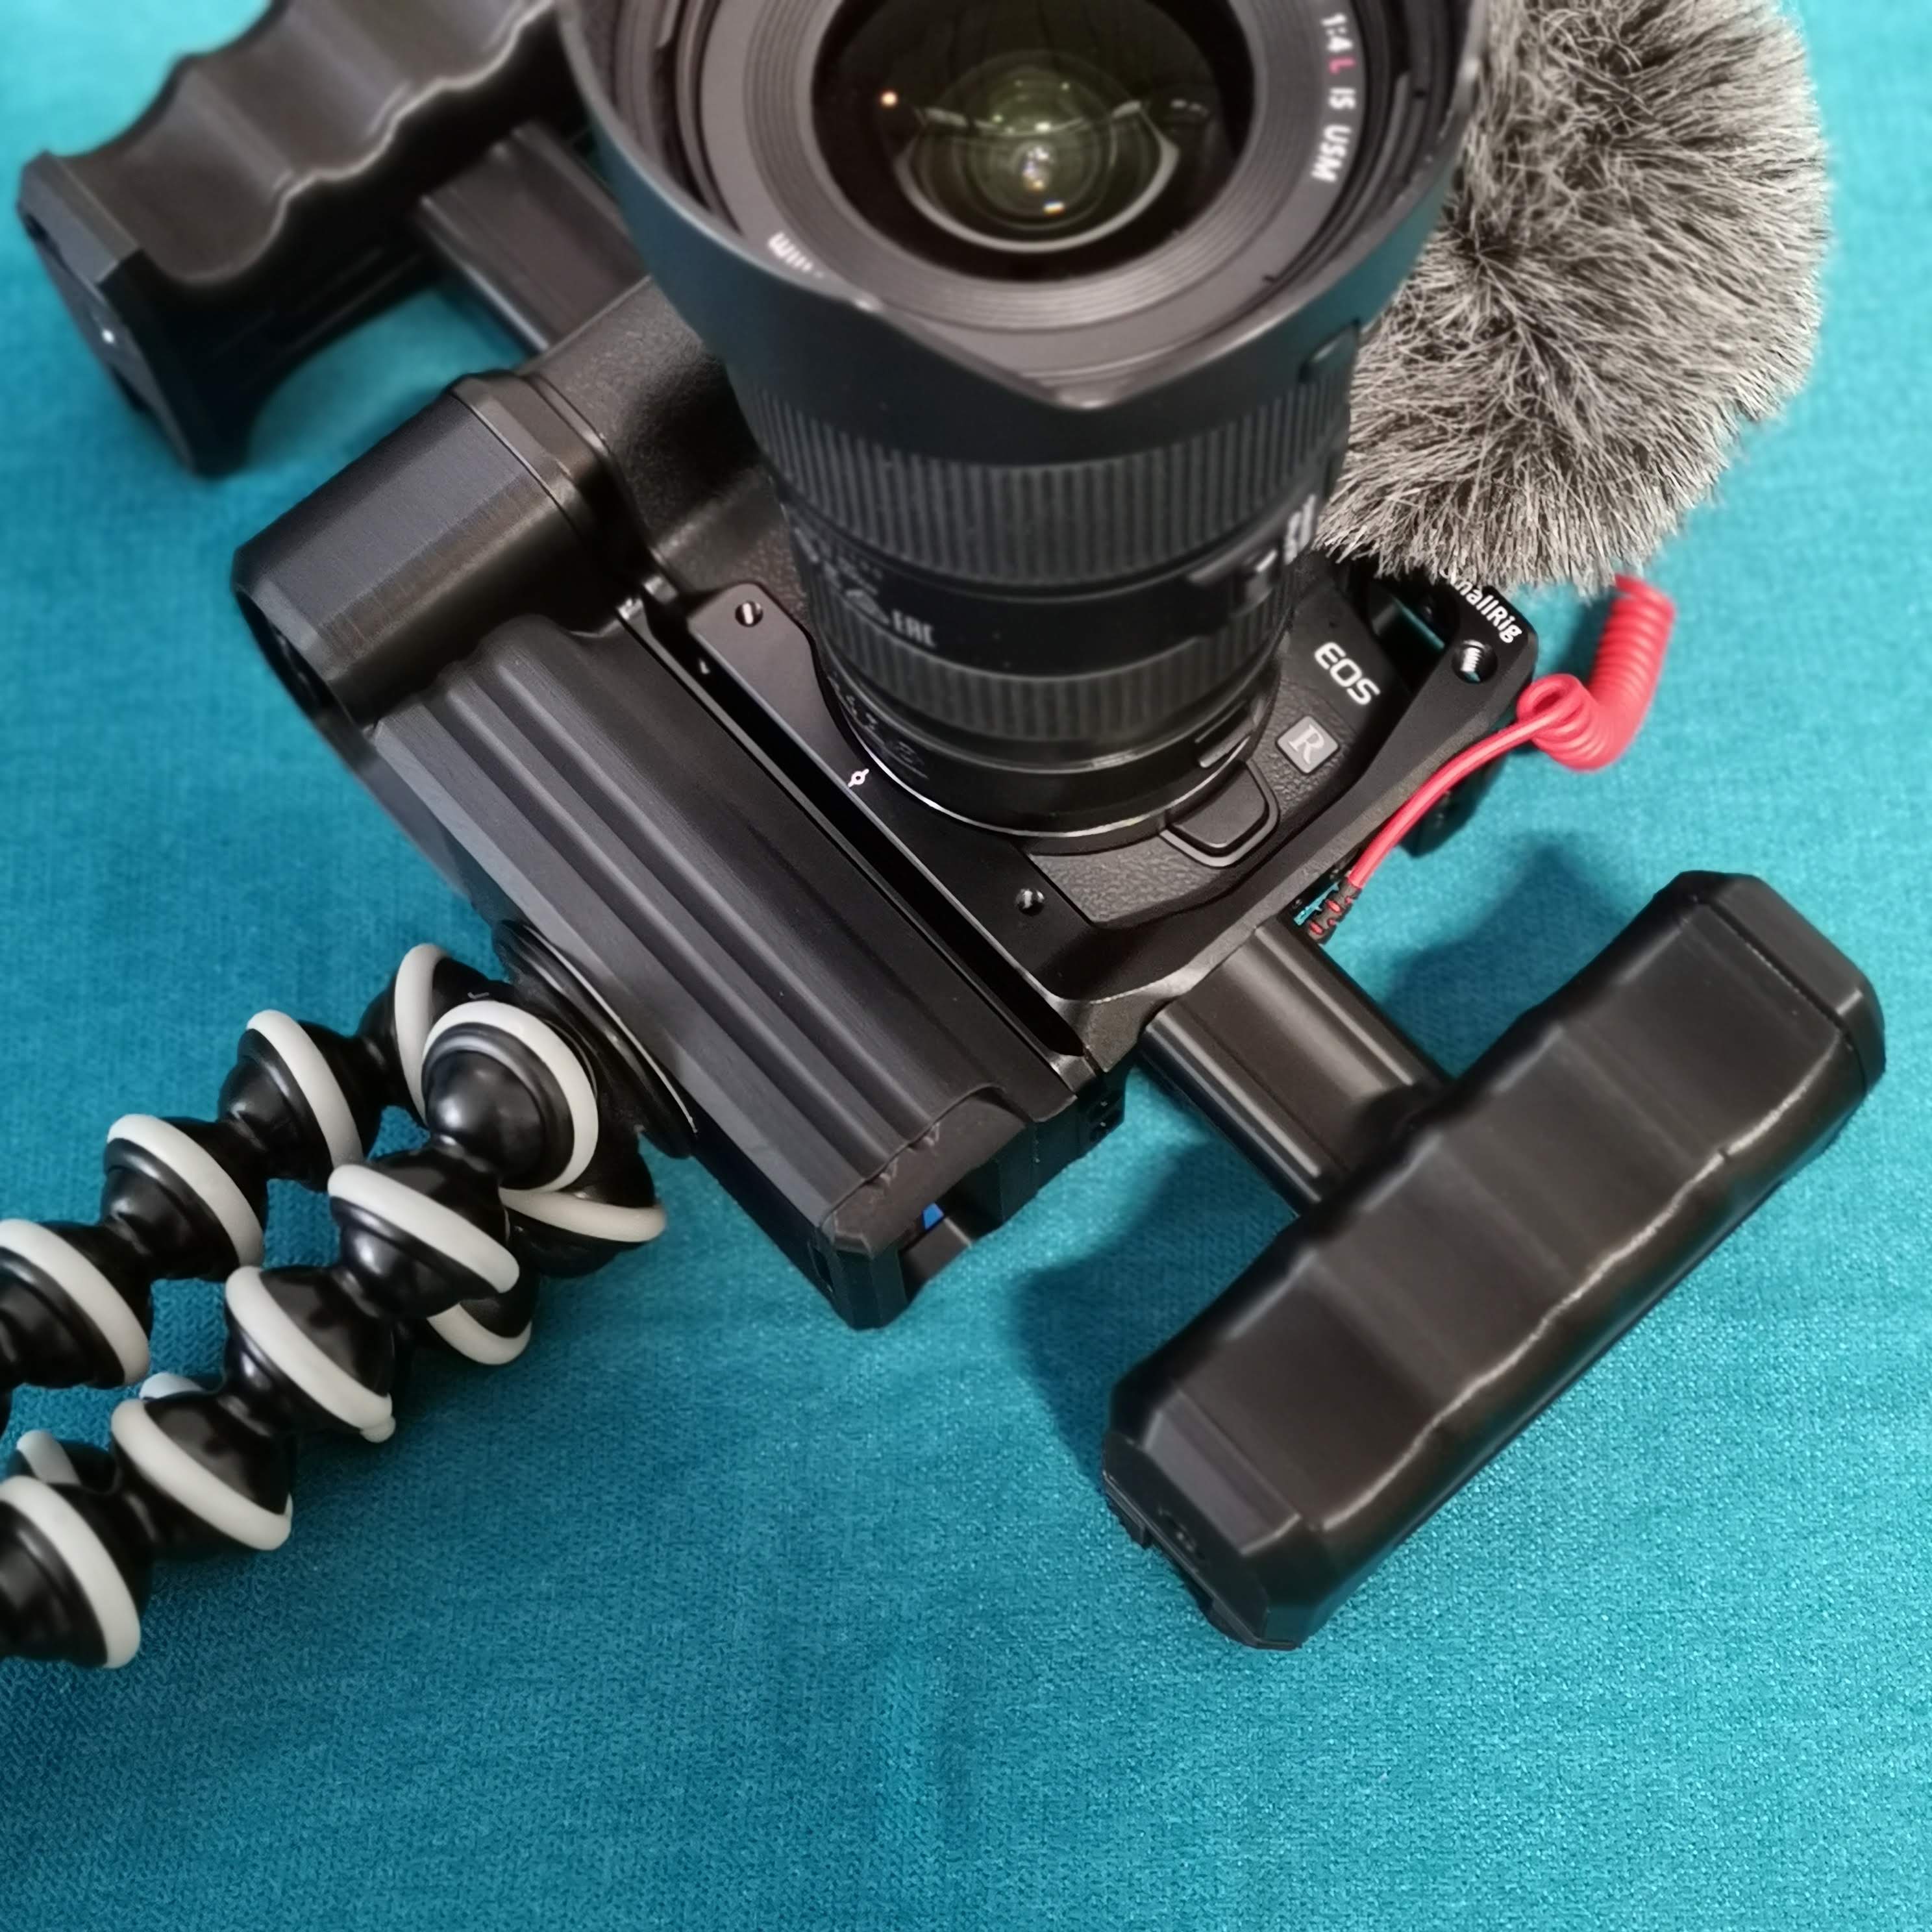 Canon EOS RP + cage + cage battery add on and side grip handles